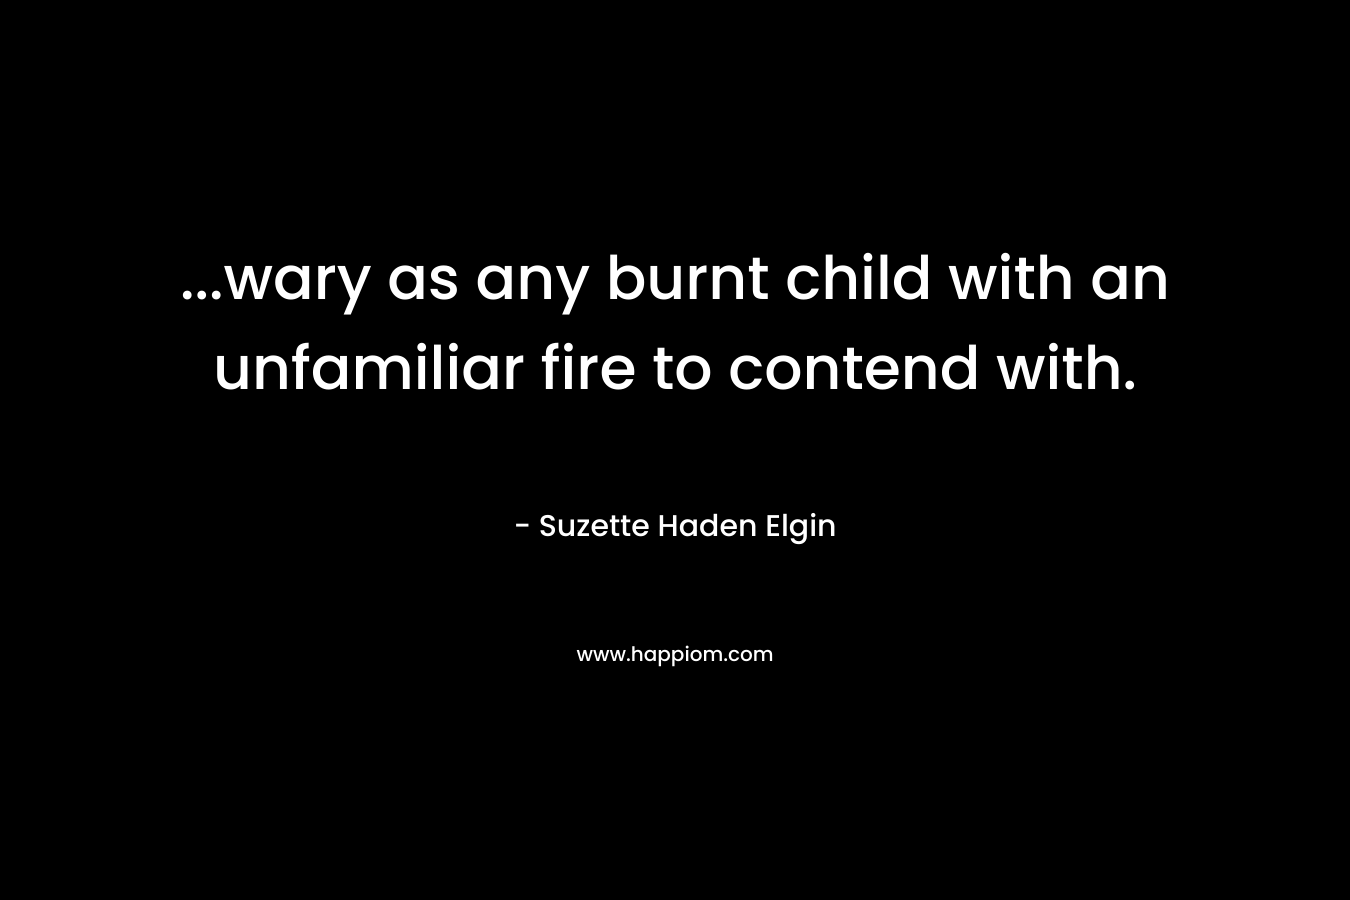 …wary as any burnt child with an unfamiliar fire to contend with. – Suzette Haden Elgin